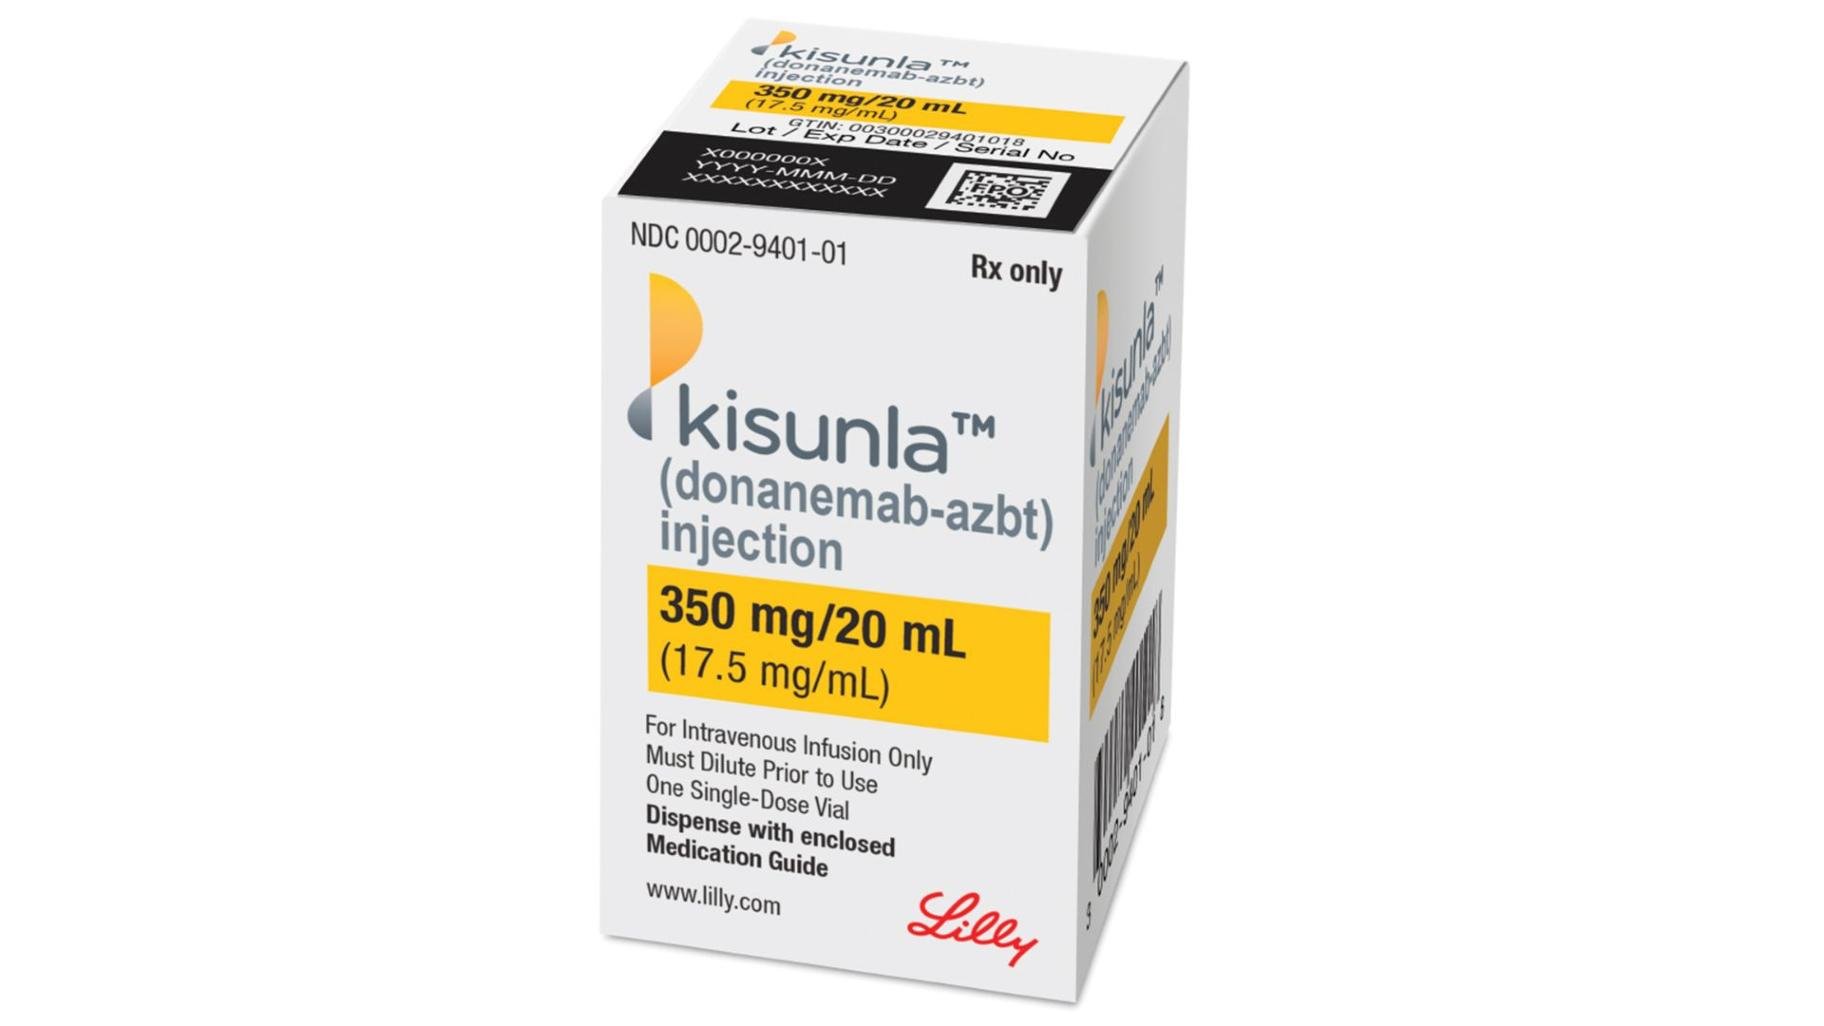 This image provided by Eli Lilly shows the company’s new Alzheimer’s drug Kisunla. (Eli Lilly and Company via AP)